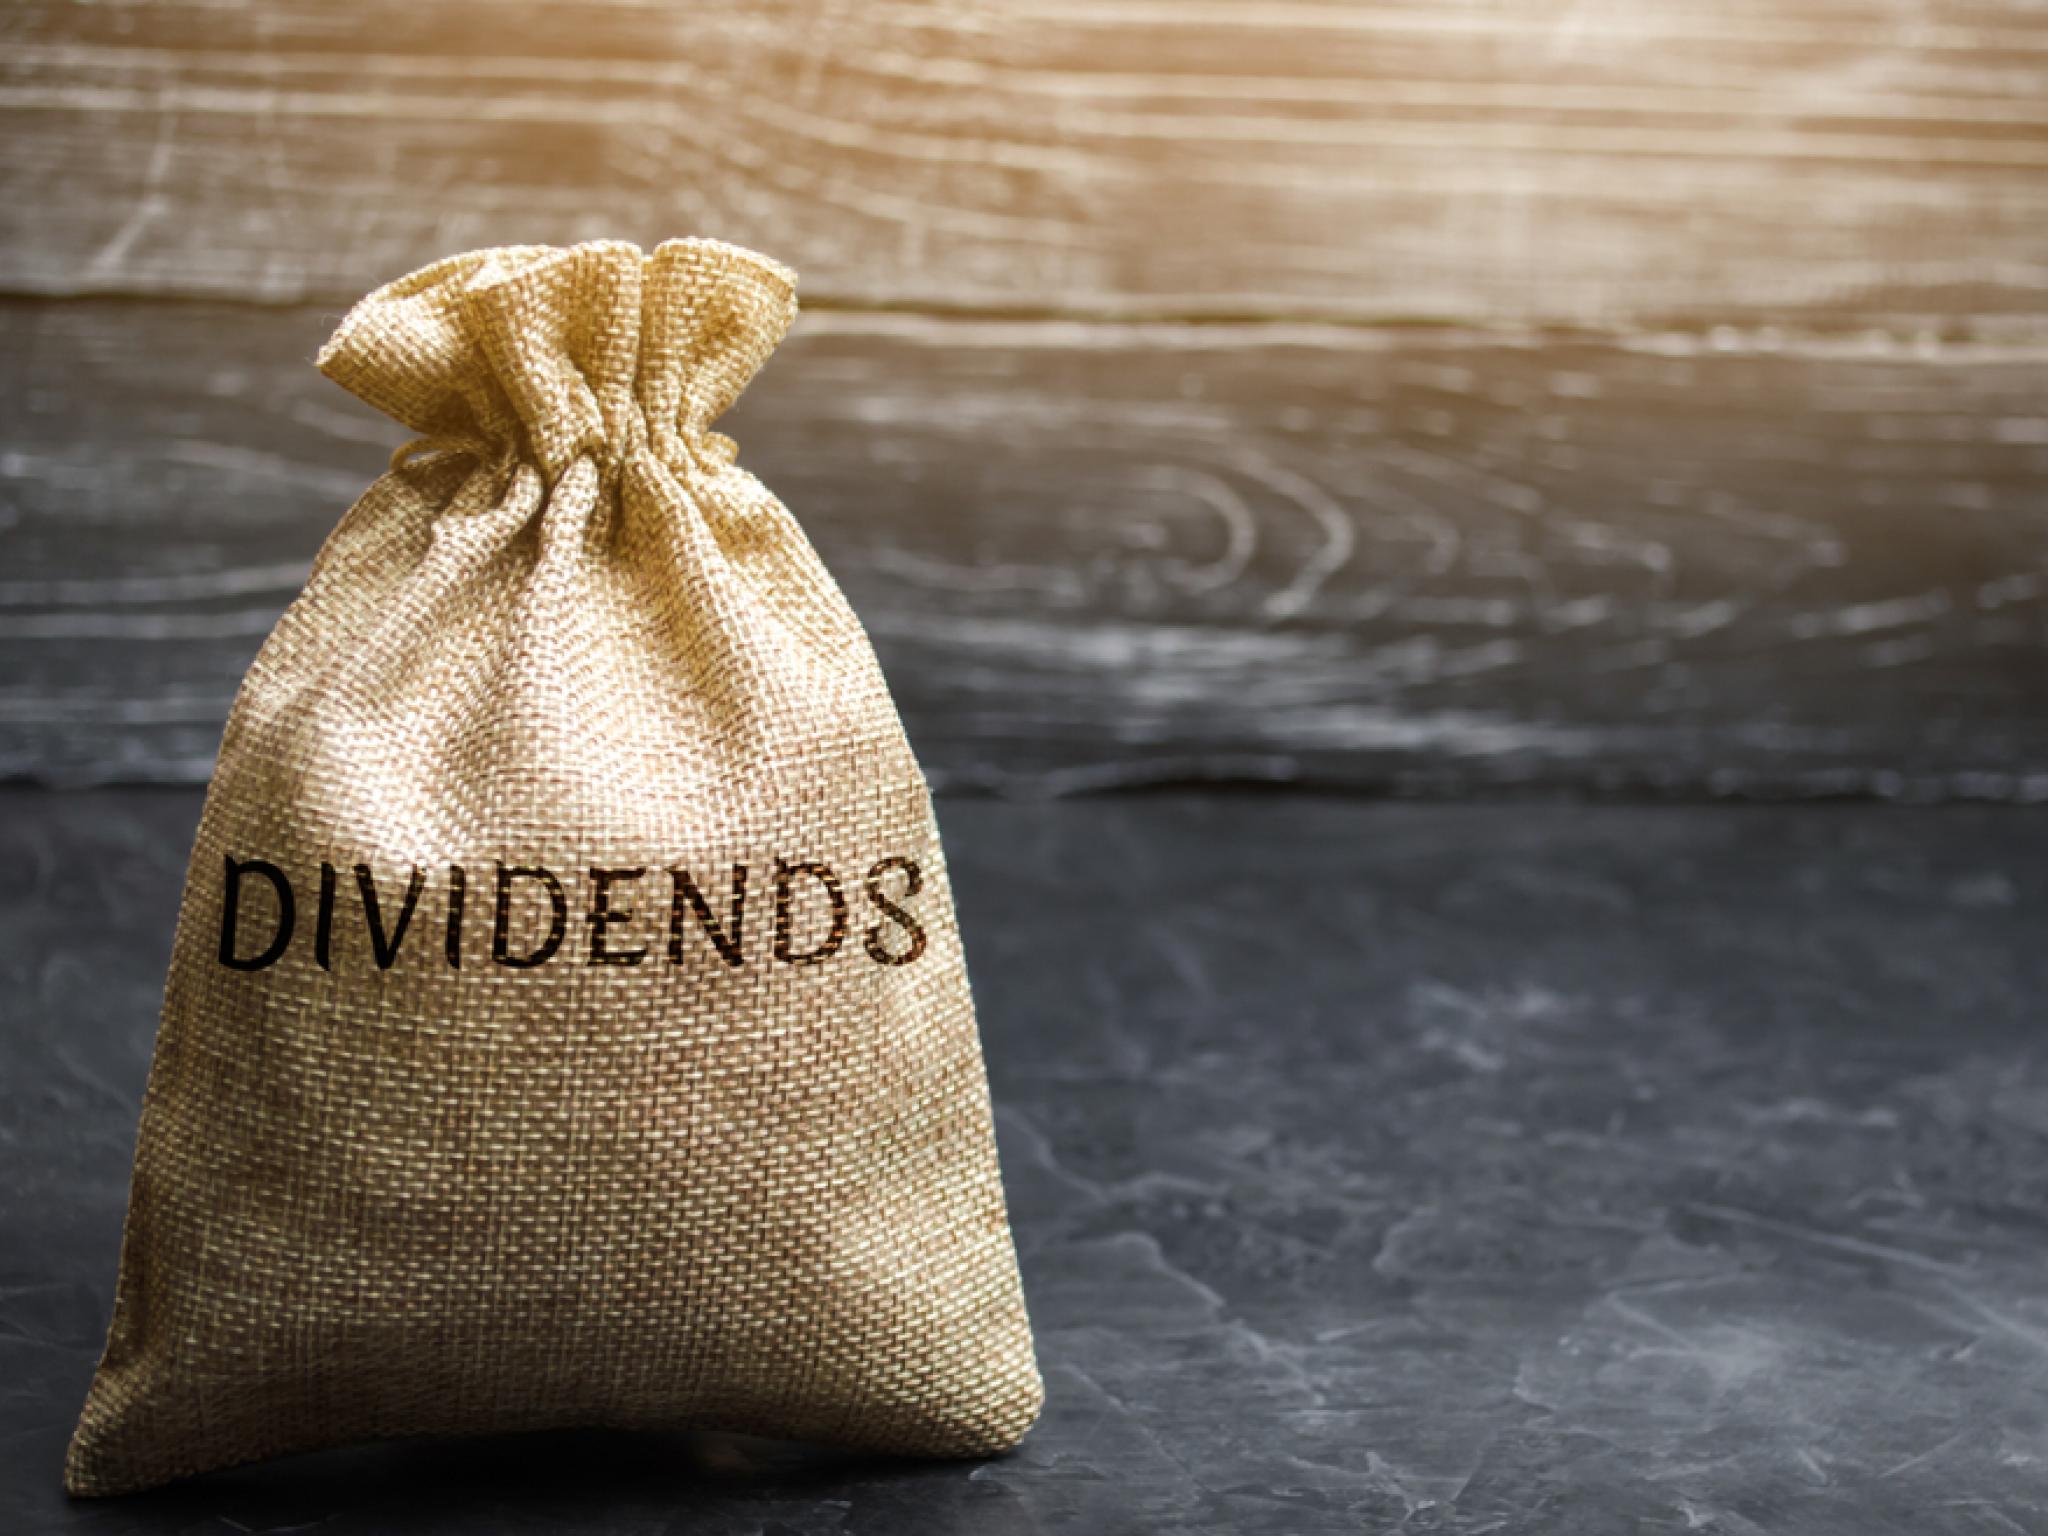  wall-streets-most-accurate-analysts-views-on-3-utilities-stocks-with-over-4-dividend-yields 